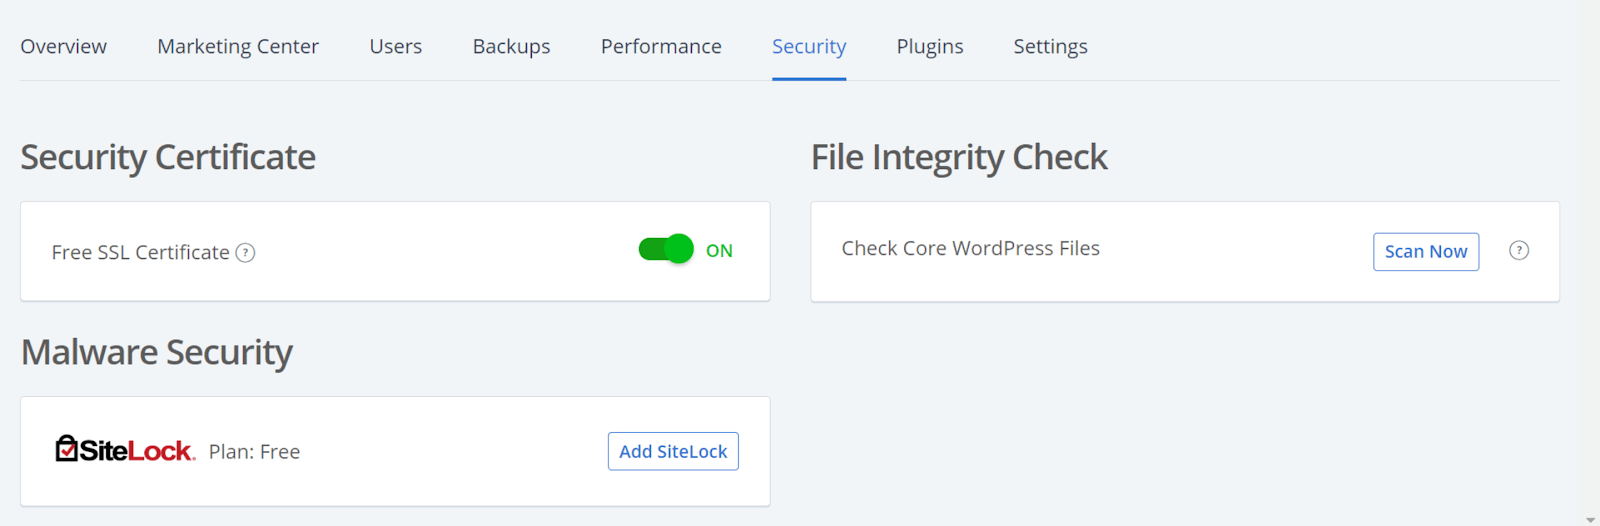 Bluehost security features